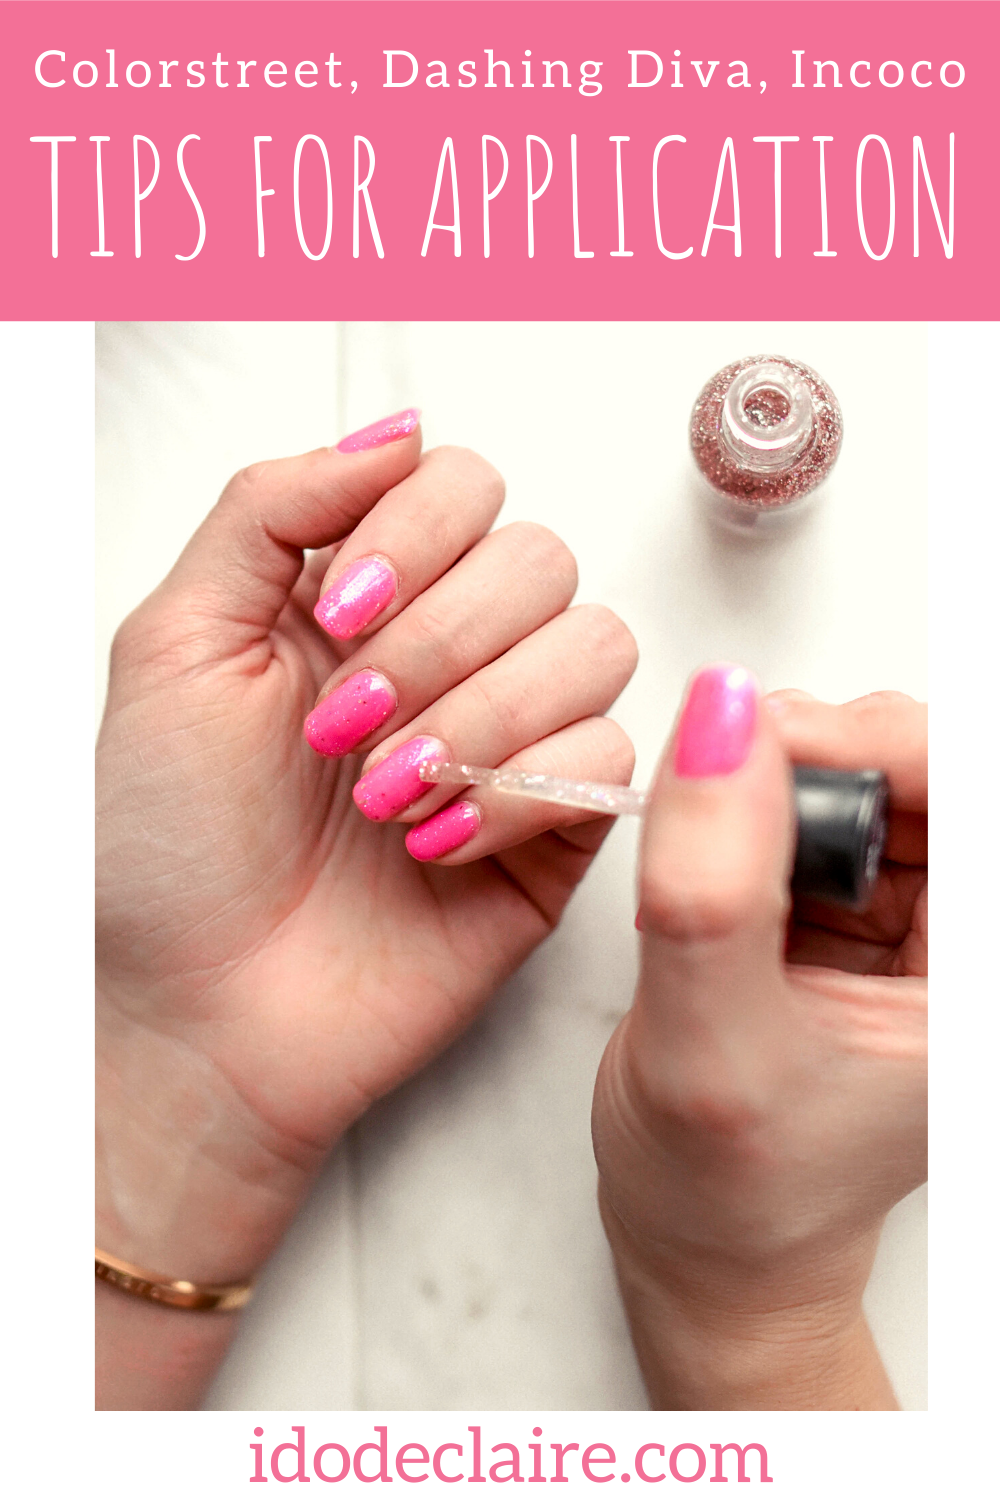 I Do Declaire Tips On Applying Dashing Diva Gel Nails Colorstreet Incoco Nail Strips